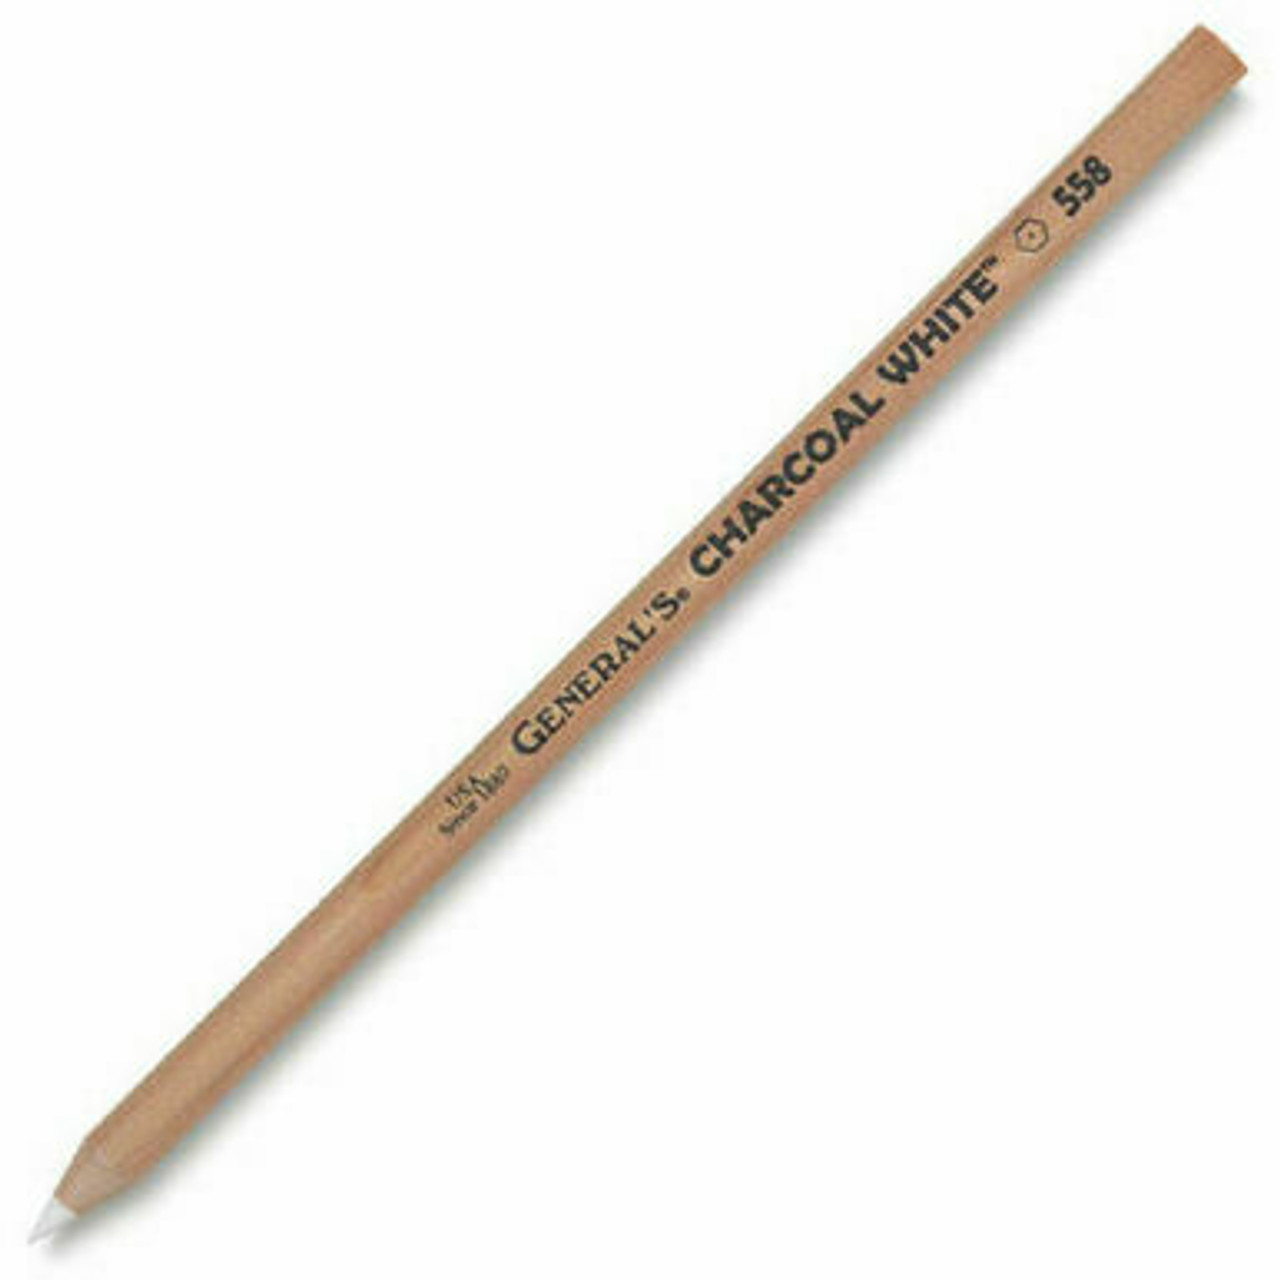 Generals Charcoal Pencil - White